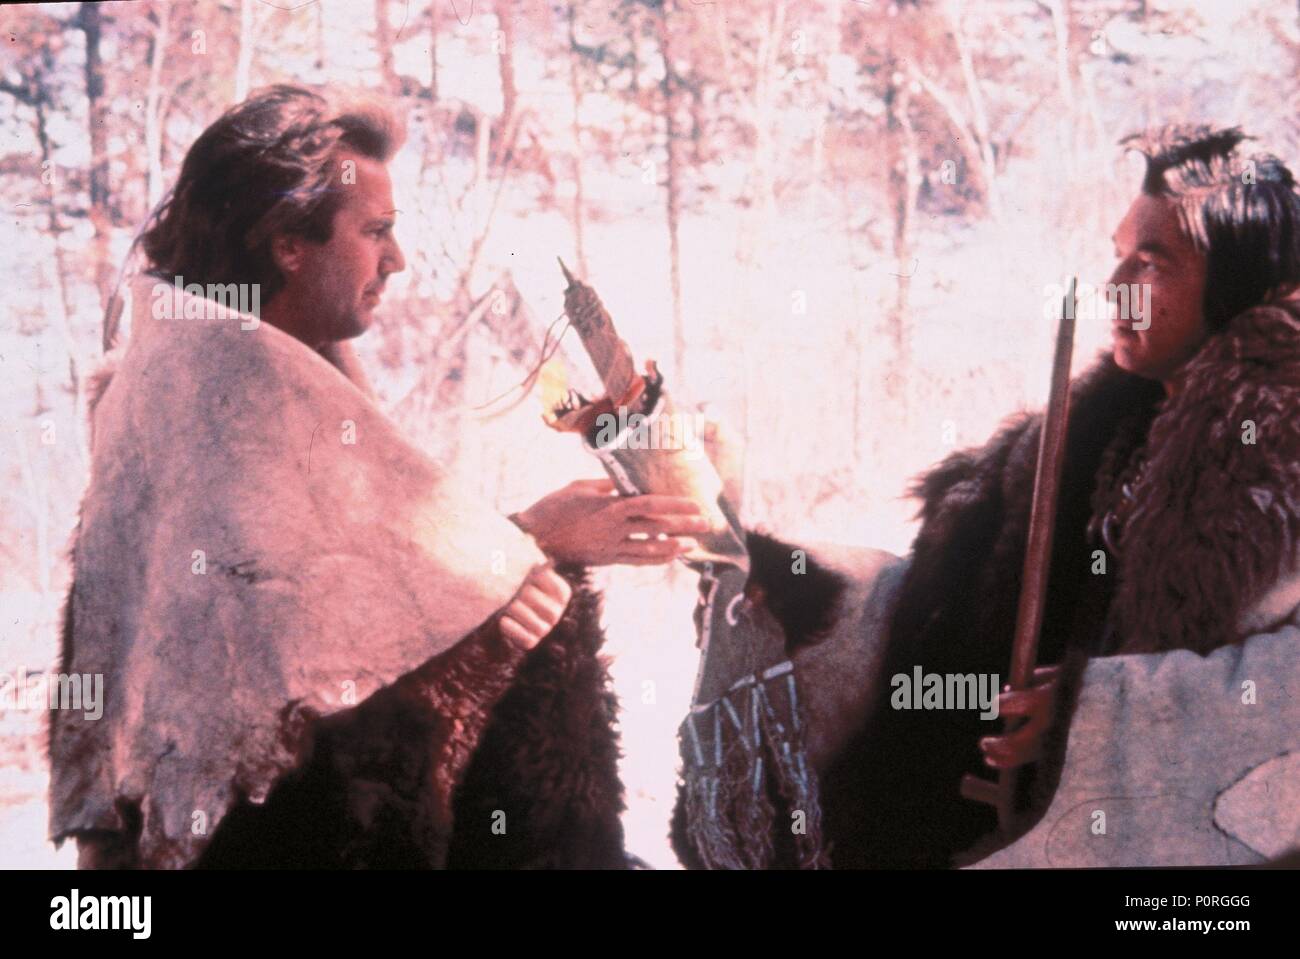 Original Film Title: DANCES WITH WOLVES.  English Title: DANCES WITH WOLVES.  Film Director: KEVIN COSTNER.  Year: 1990.  Stars: KEVIN COSTNER; GRAHAM GREENE. Credit: ORION PICTURES / Album Stock Photo